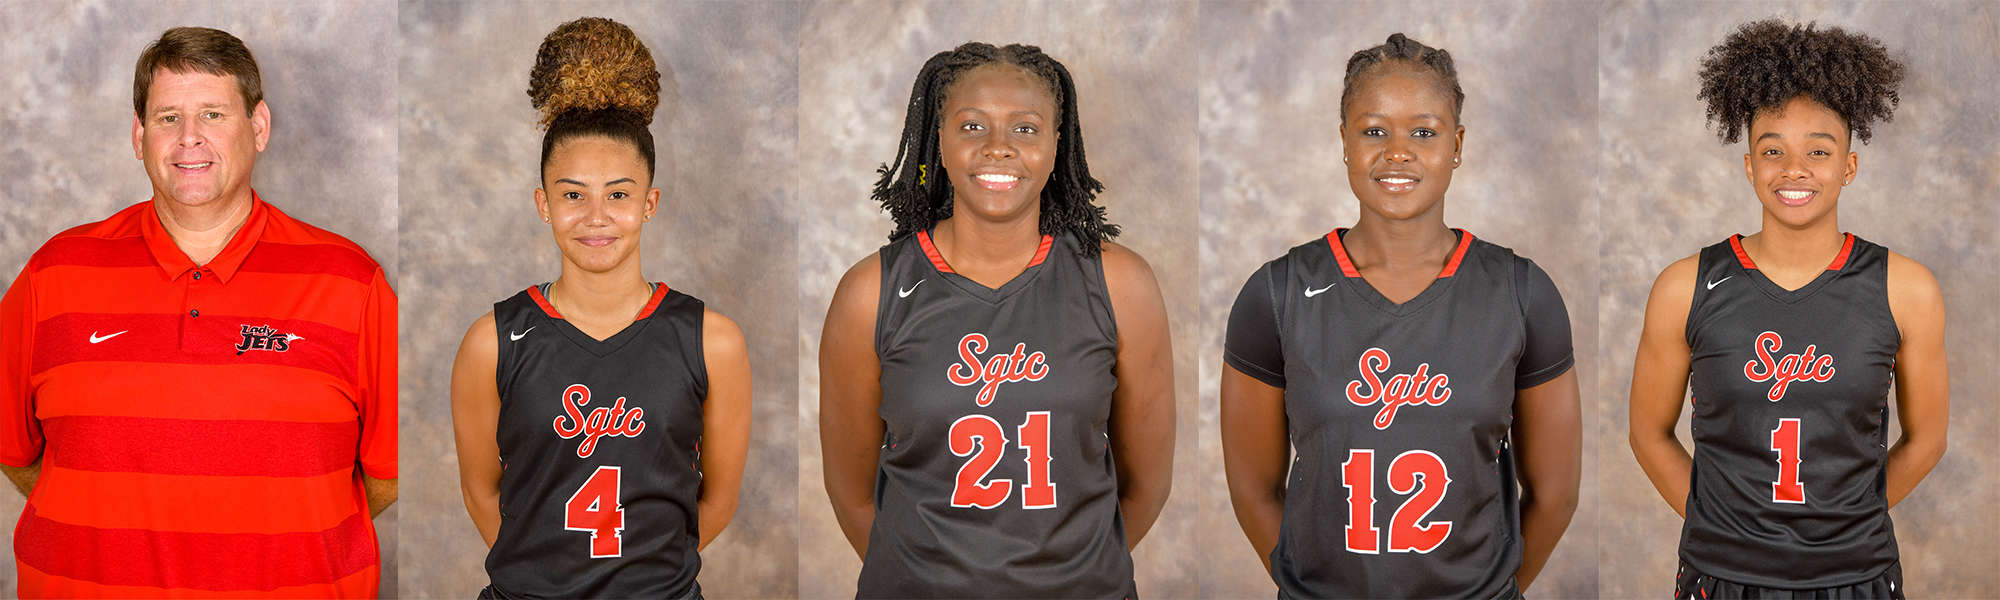 SGTC Athletic Director and Lady Jets head coach James Frey was named the Division I GCAA Coach of the Year for 2018 – 2019 and Lady Jets Alyssa Nieves, Bigue Sarr, Fatou Pouye, and Ricka Jackson all earned All-Region honors for their play this season.